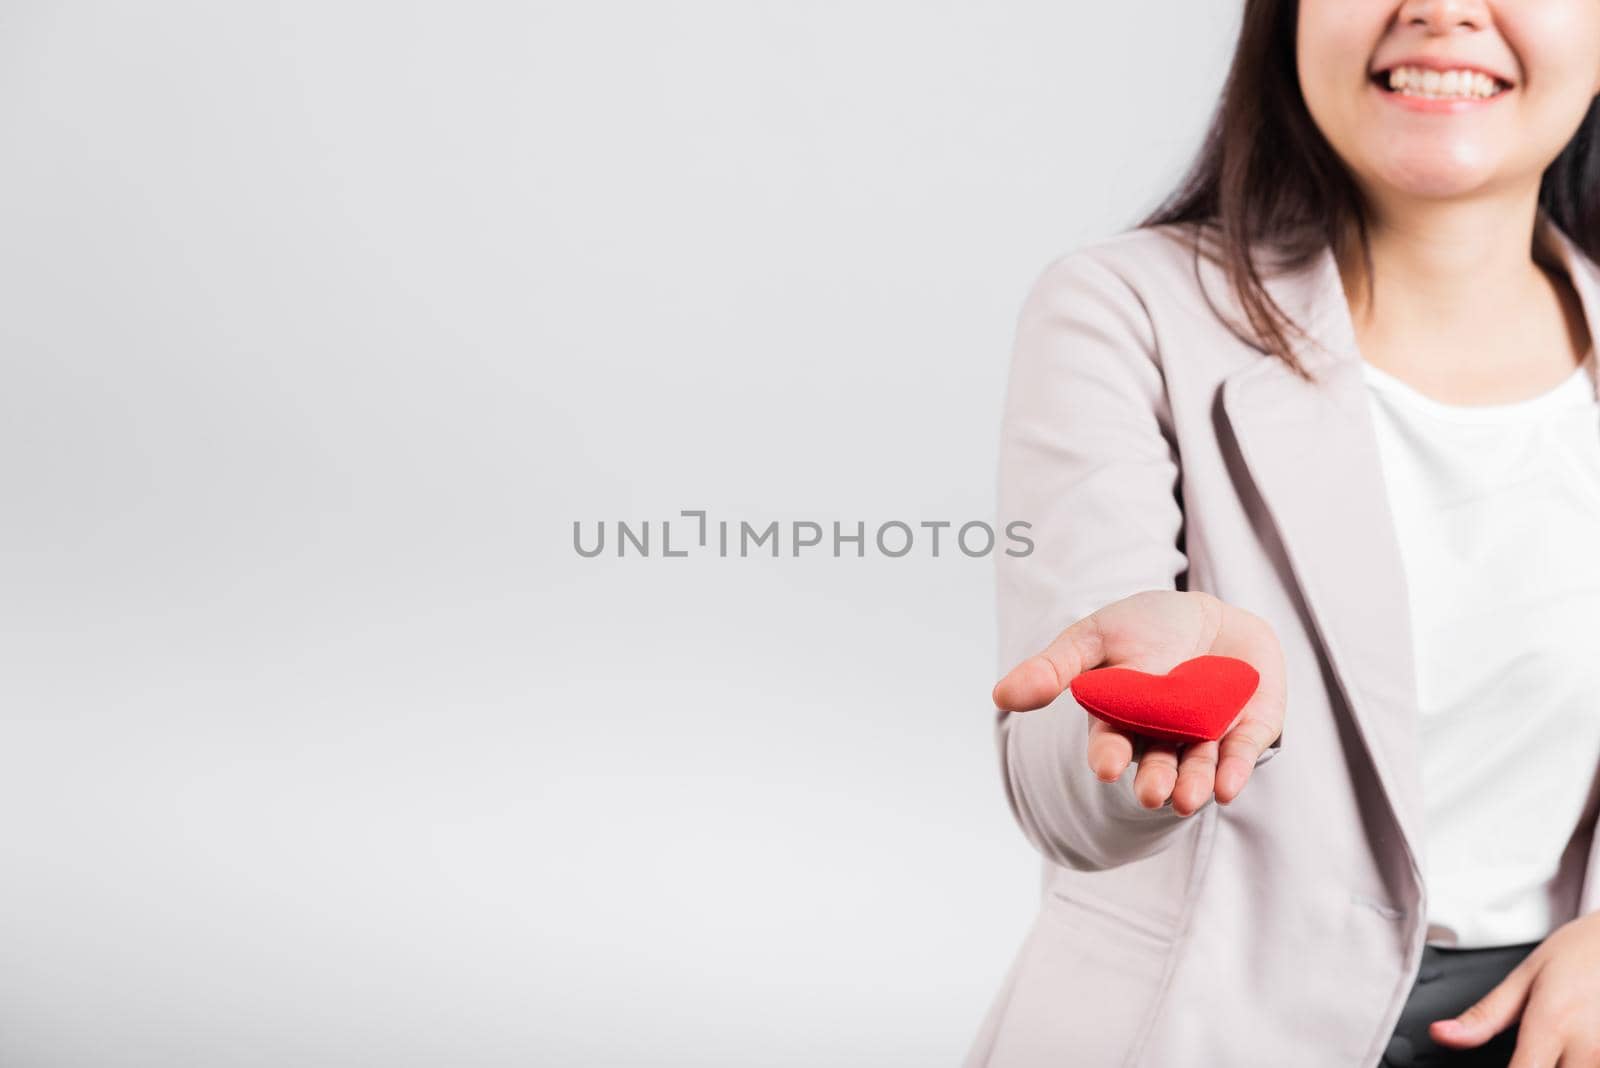 Smiling woman confidence showing holding red heart with her hand palm isolated white background, Asian happy portrait beautiful young female send love and happy valentine in studio shot, copy space